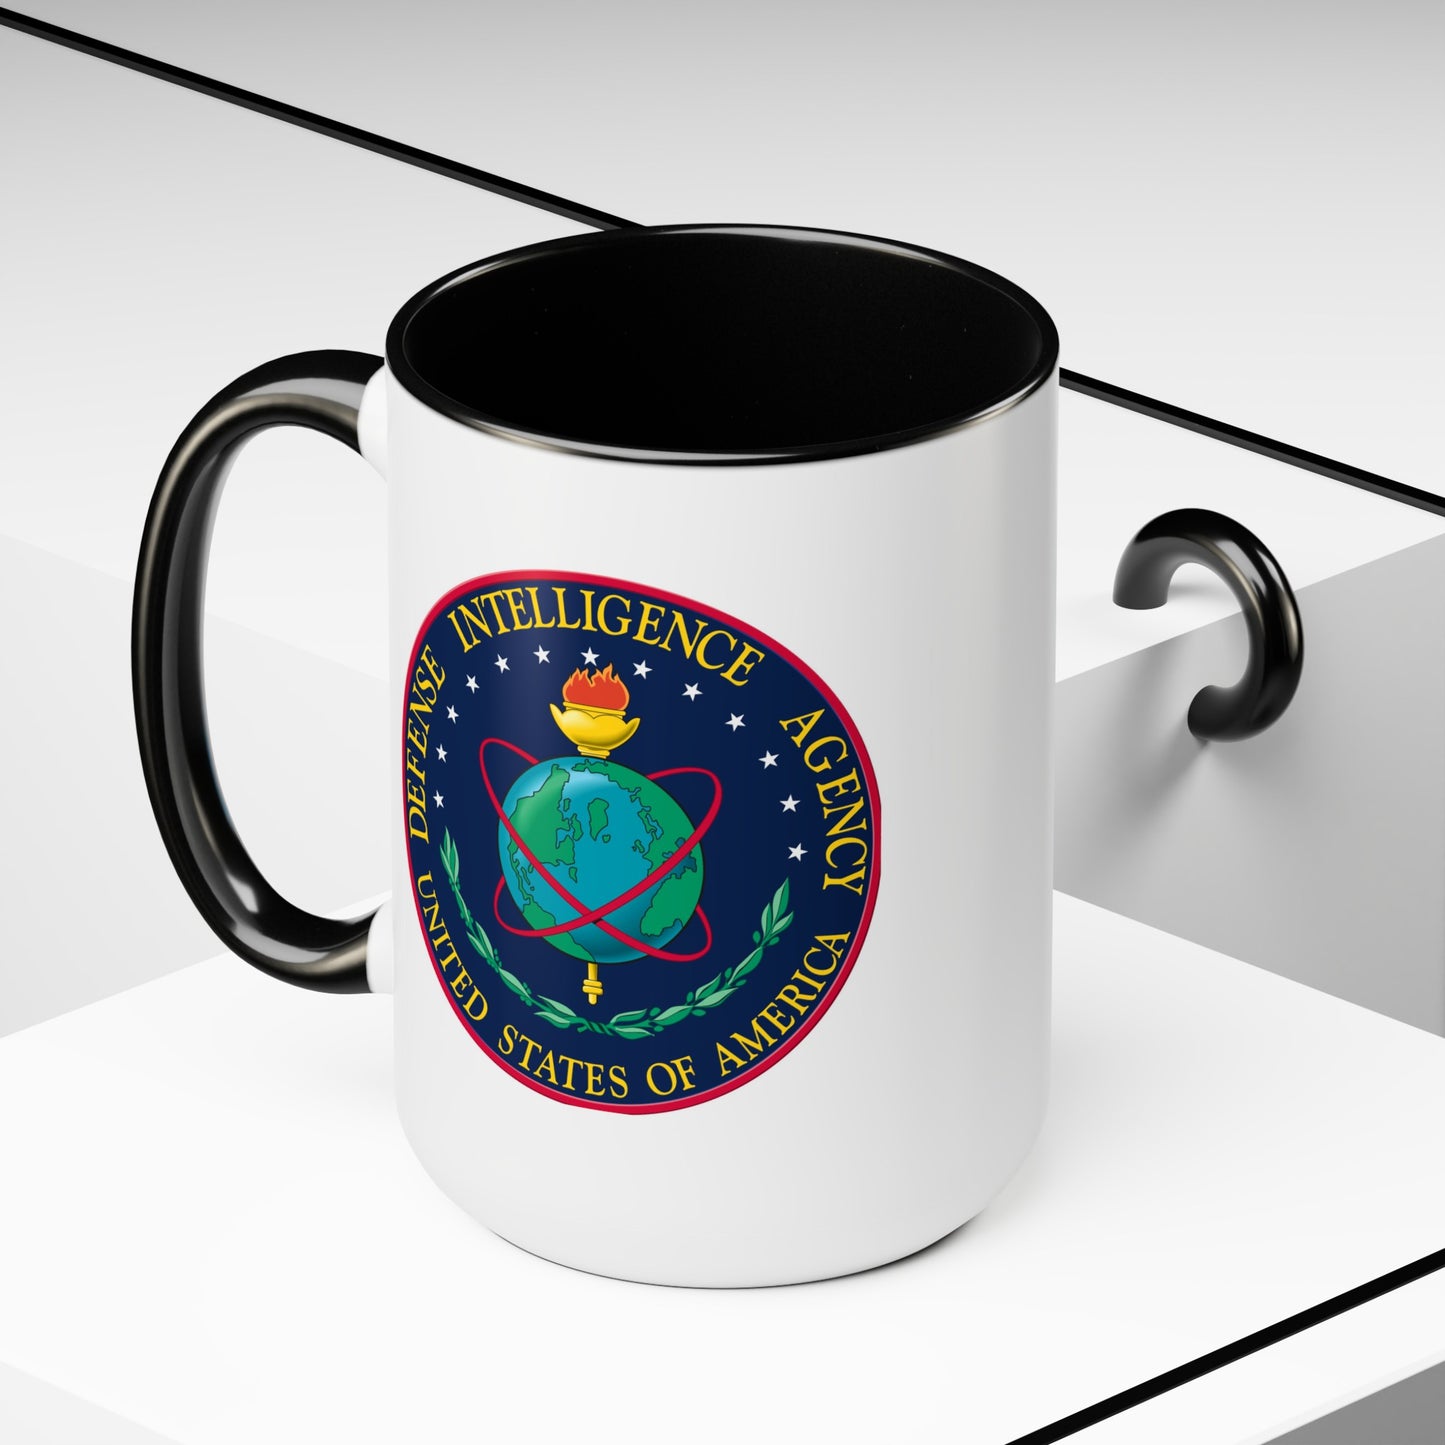 US Defense Intelligence Agency Coffee Mugs - Double Sided Black Accent White Ceramic15oz by TheGlassyLass.com